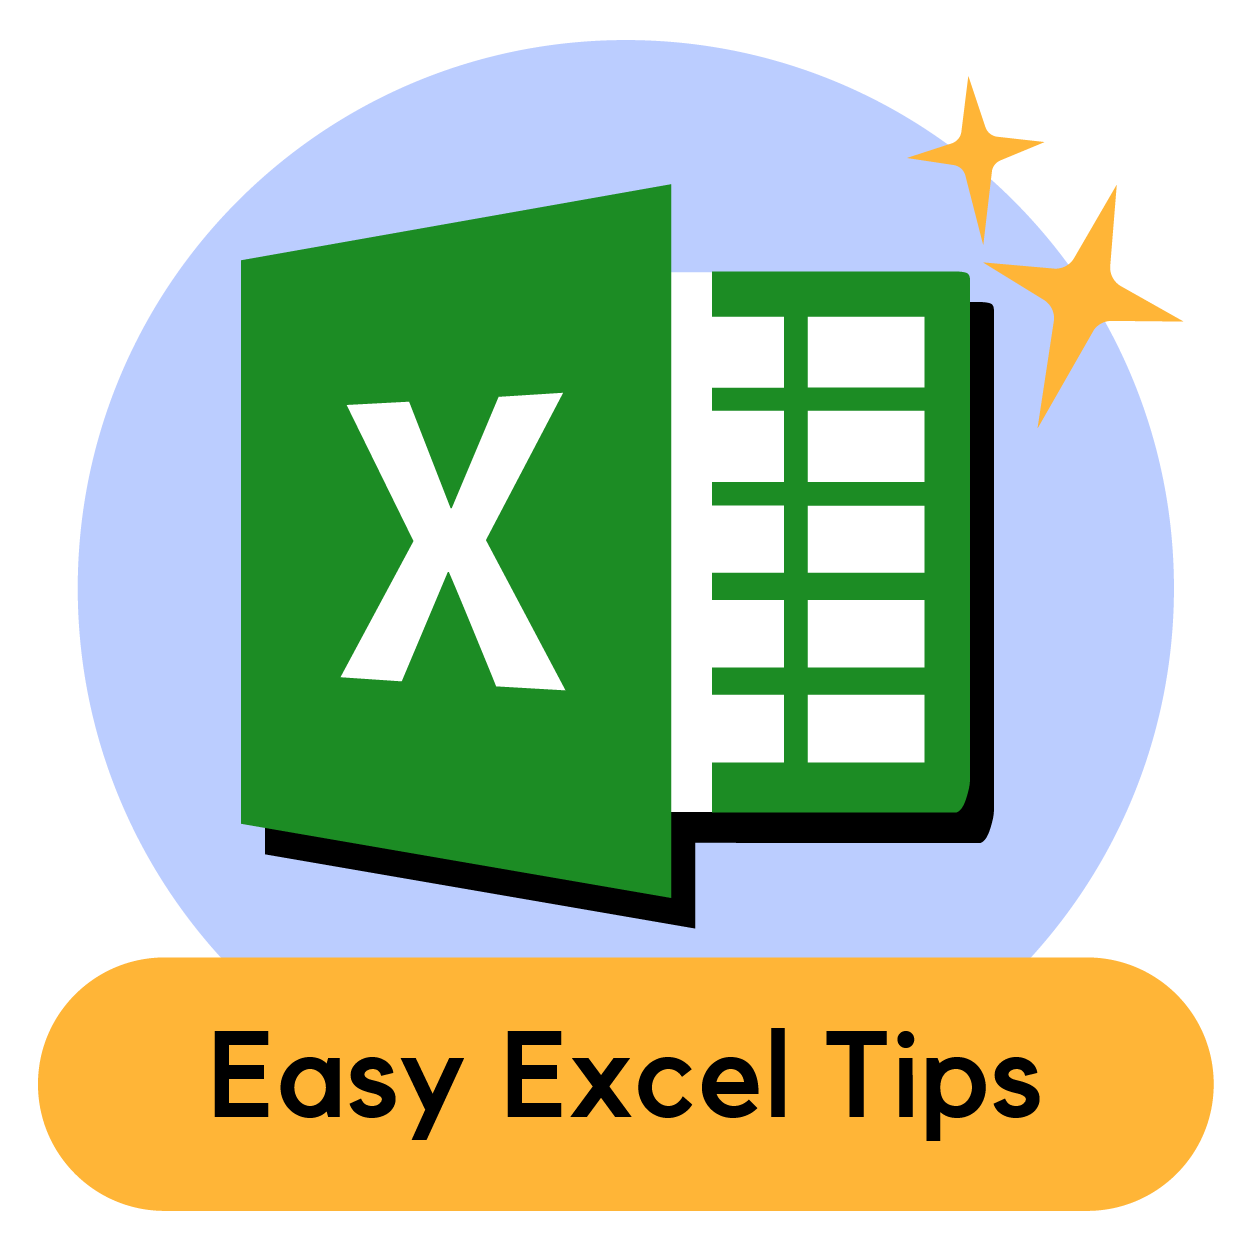 Easy Excel Tips